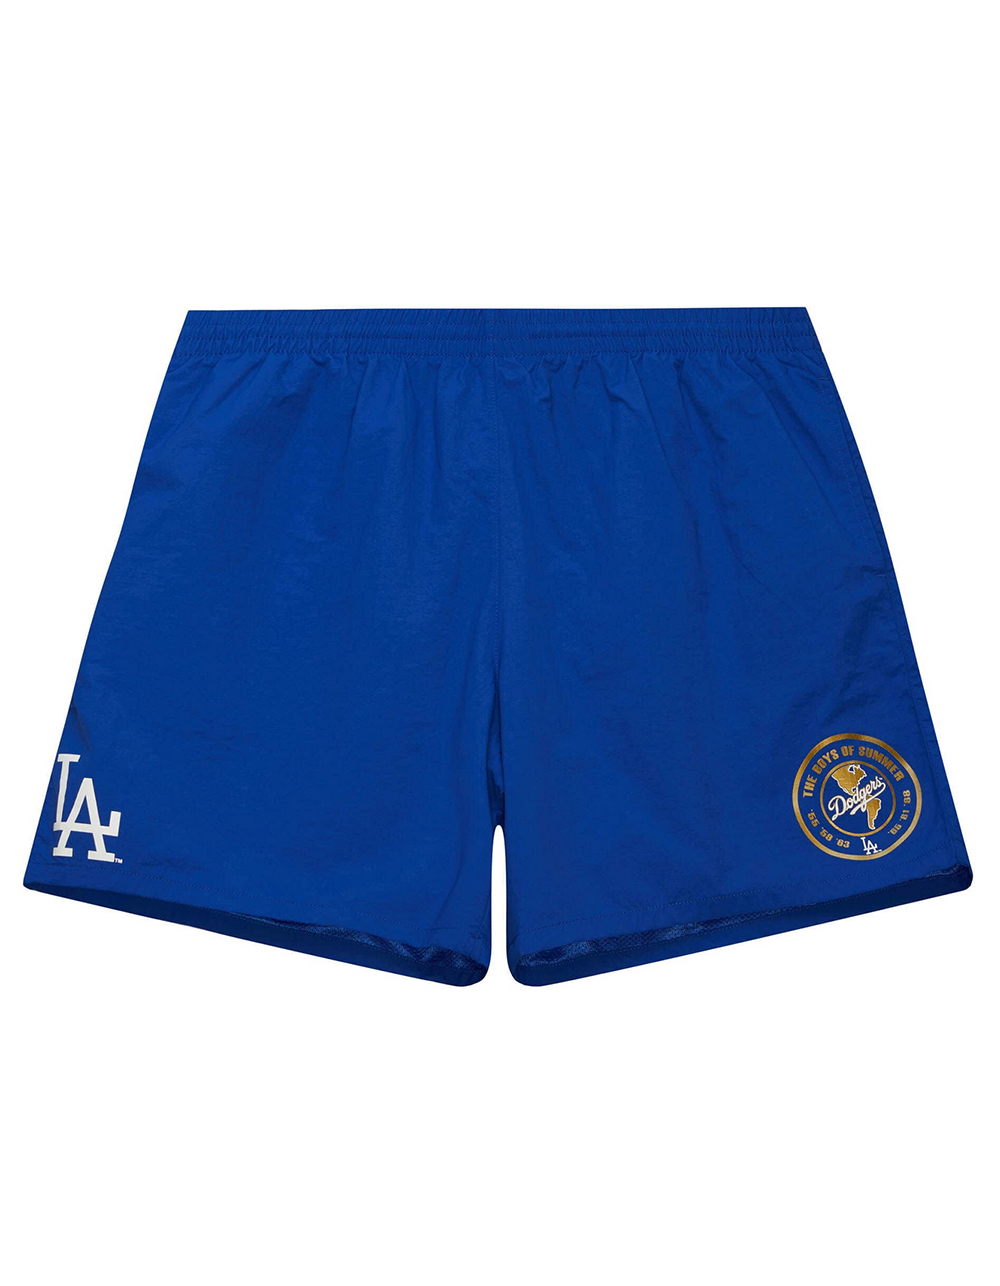 MITCHELL & NESS Los Angeles Dodgers Team Heritage Mens Shorts - ROYAL